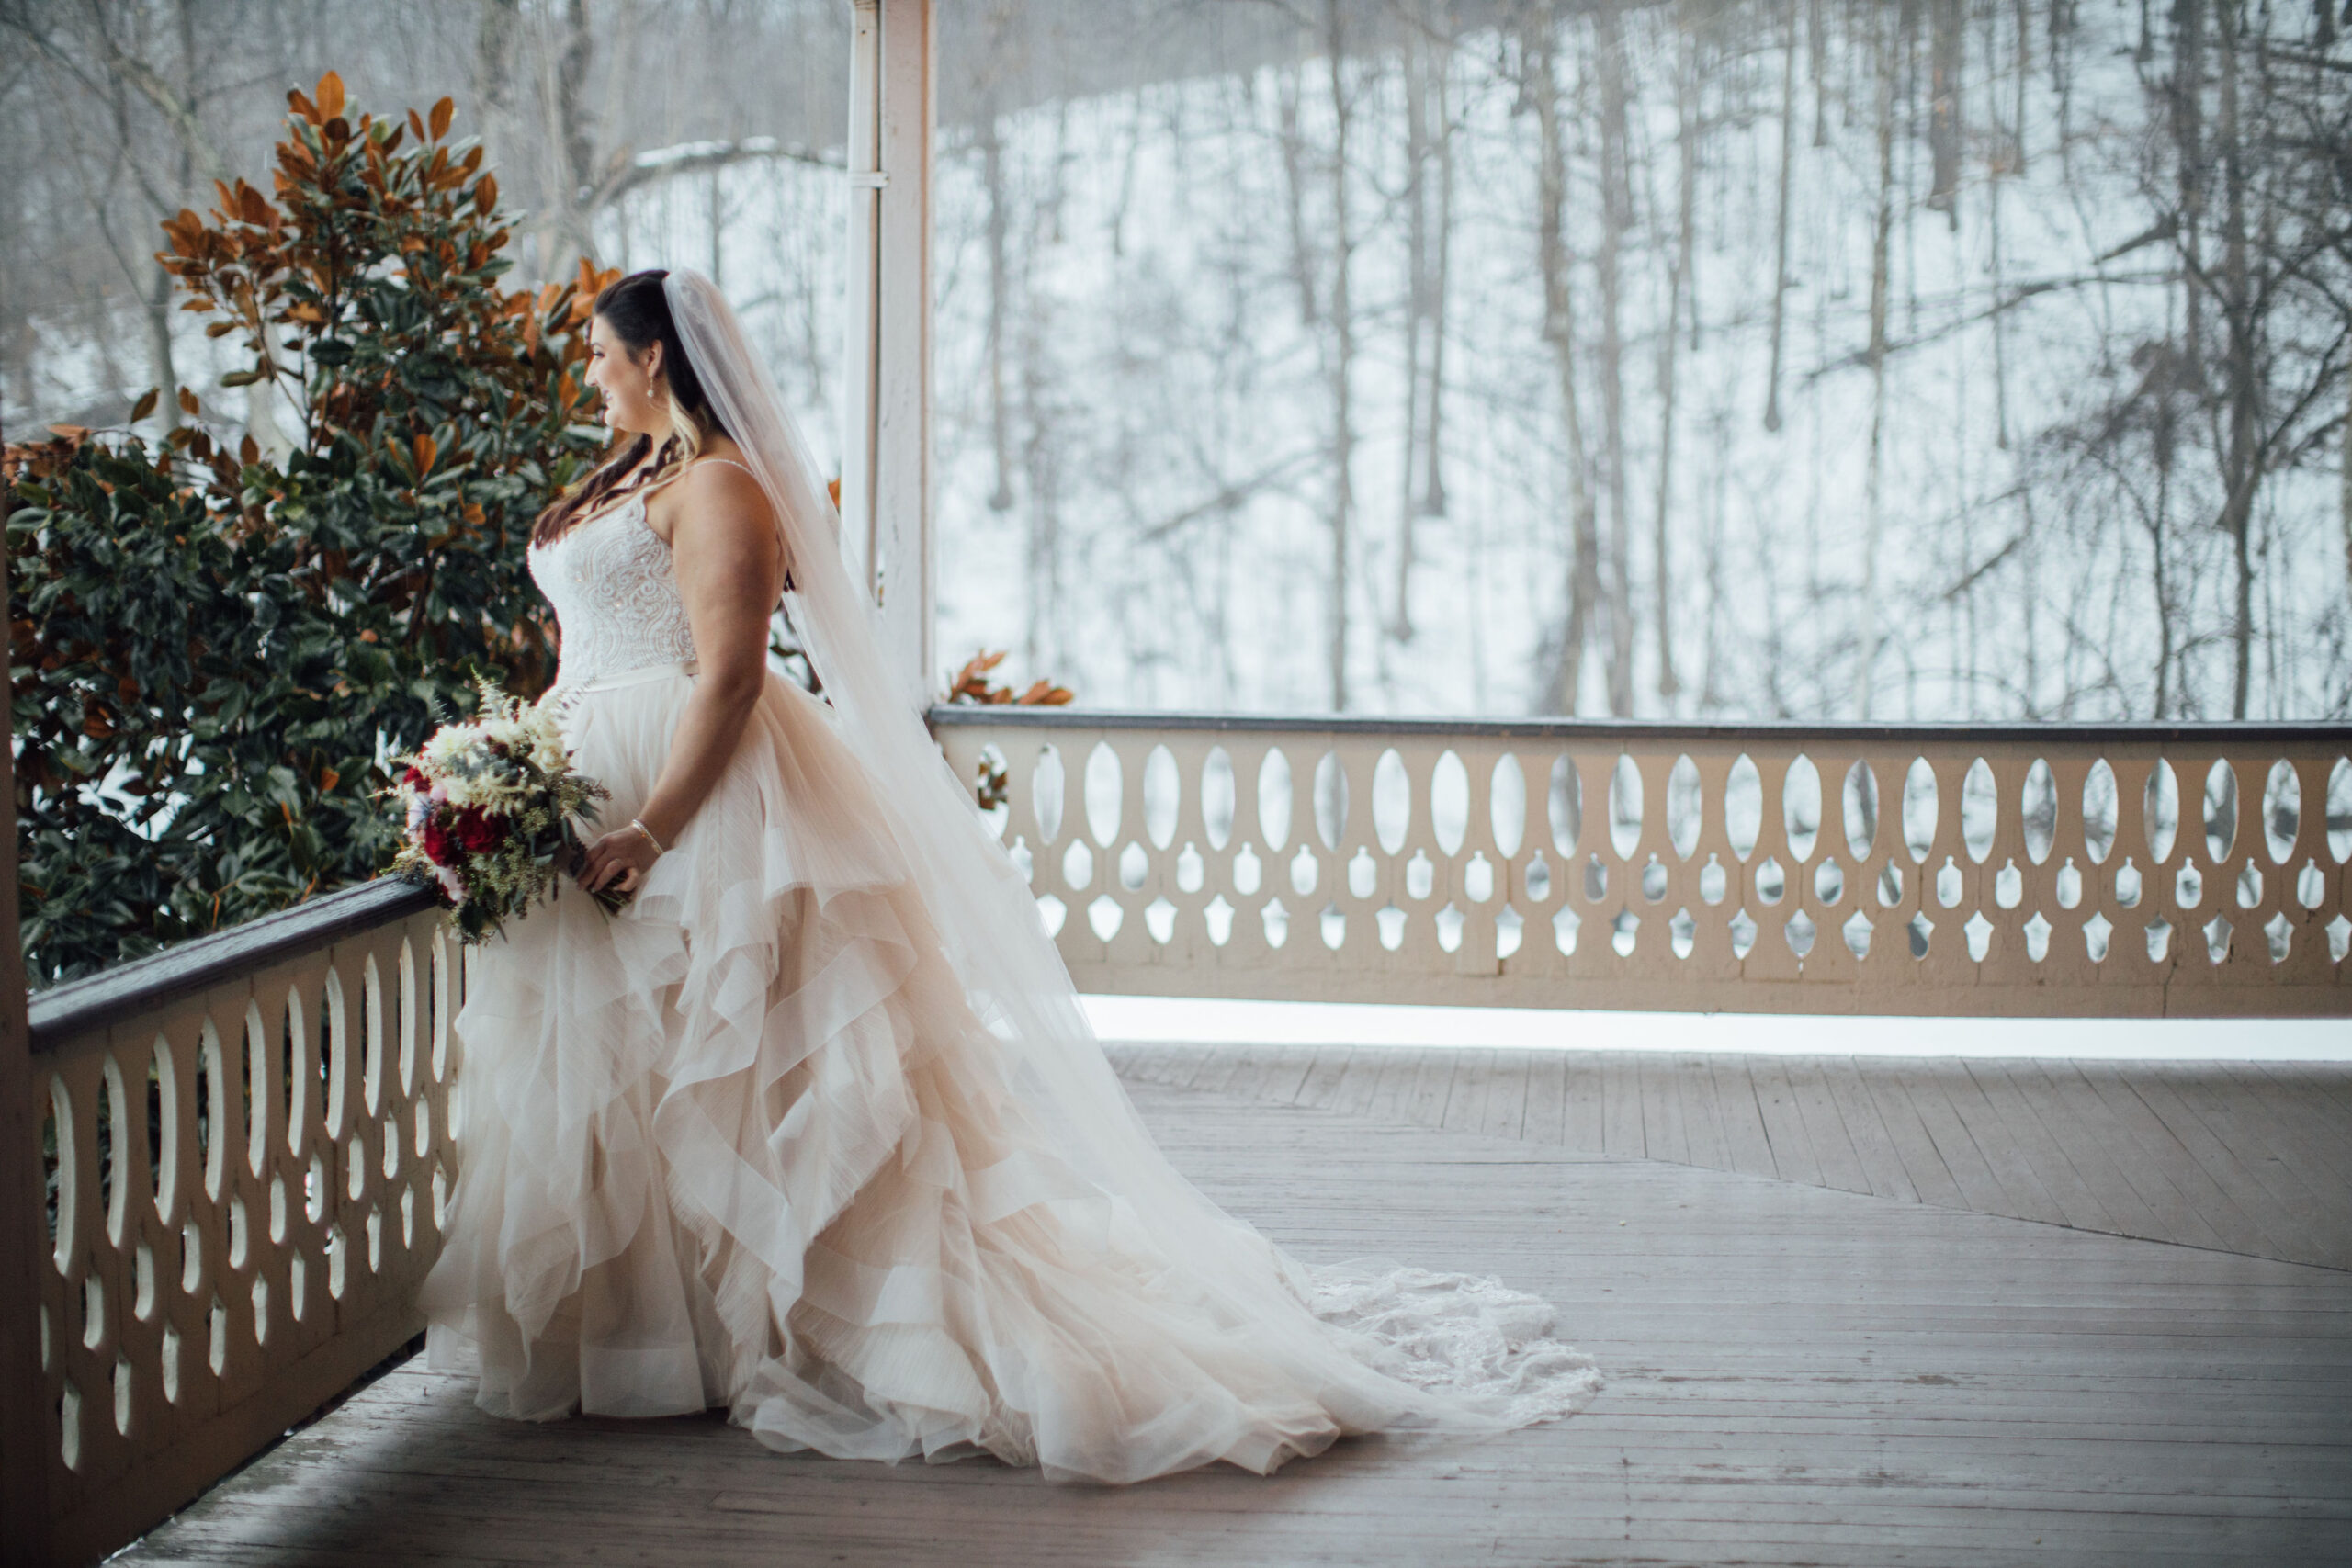 Plus sized bride wearing beautiful cream colored wedding dress with layering on the skirt. Bride has a long veil and is holding a winter colored bouquet.